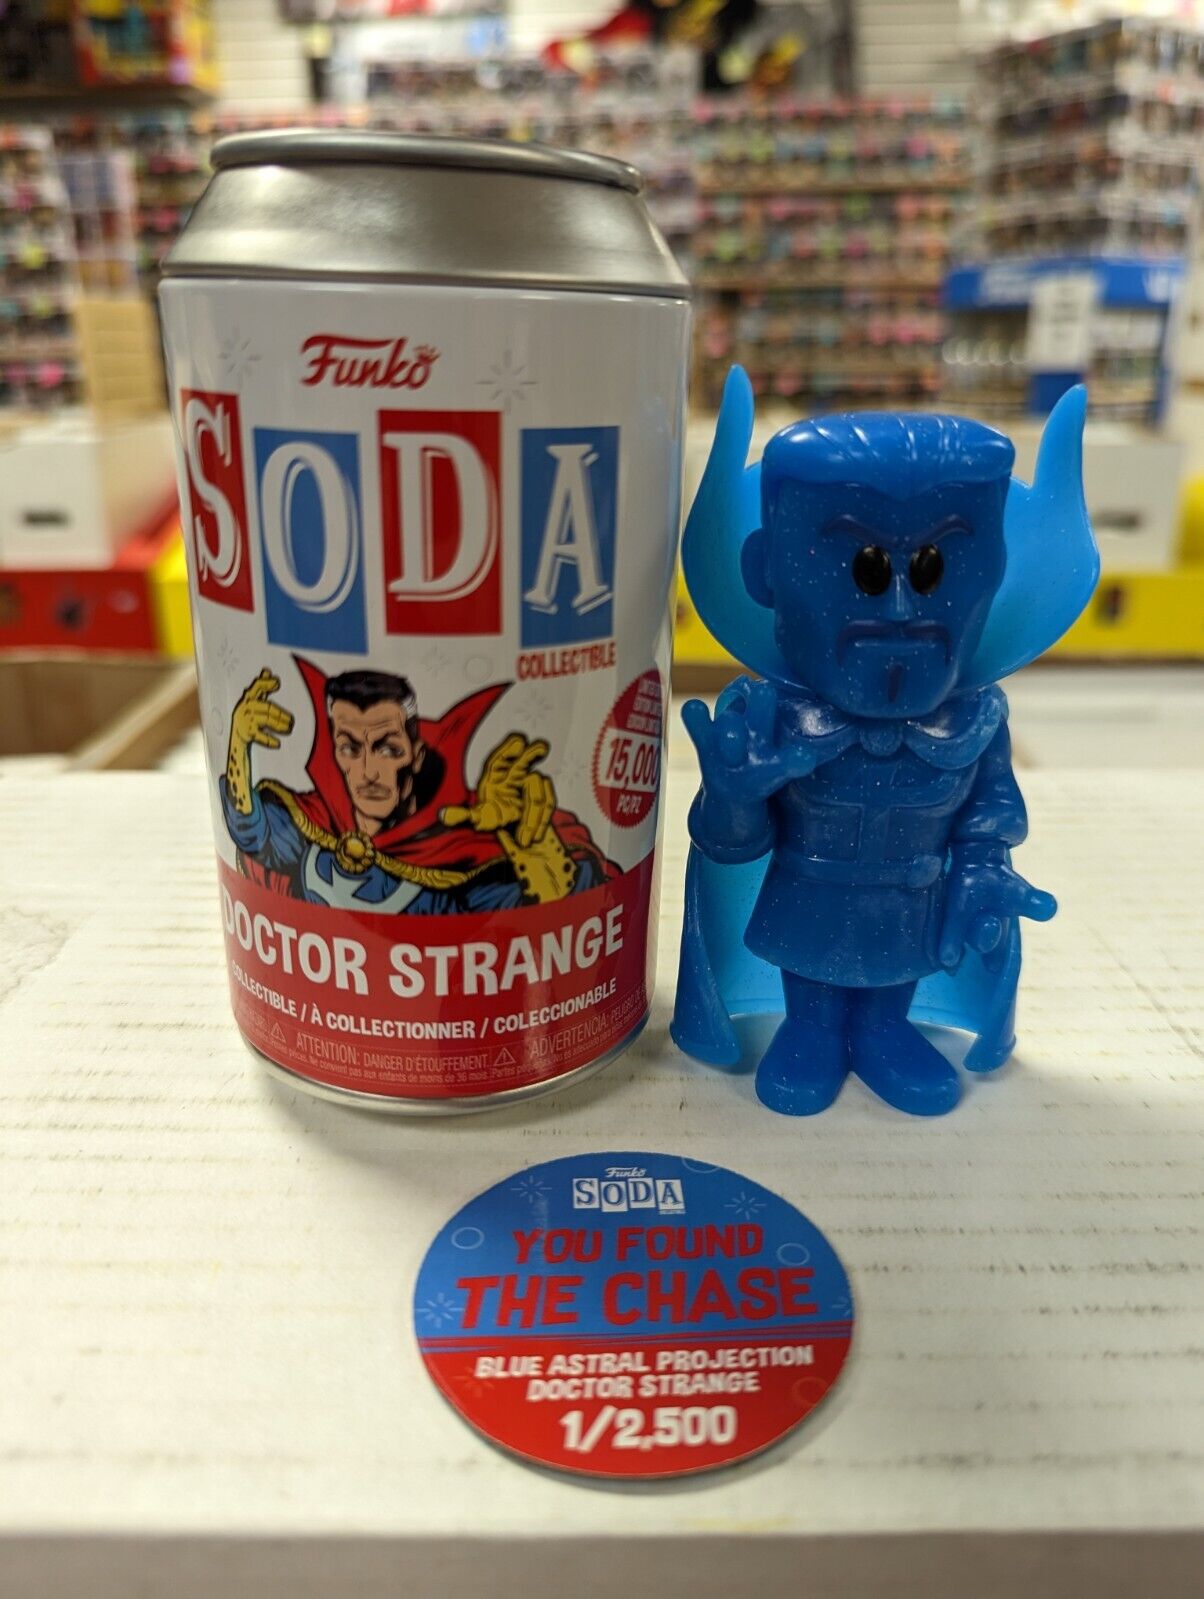 Funko Soda Doctor Strange Blue Astral Projection Chase 1/2500